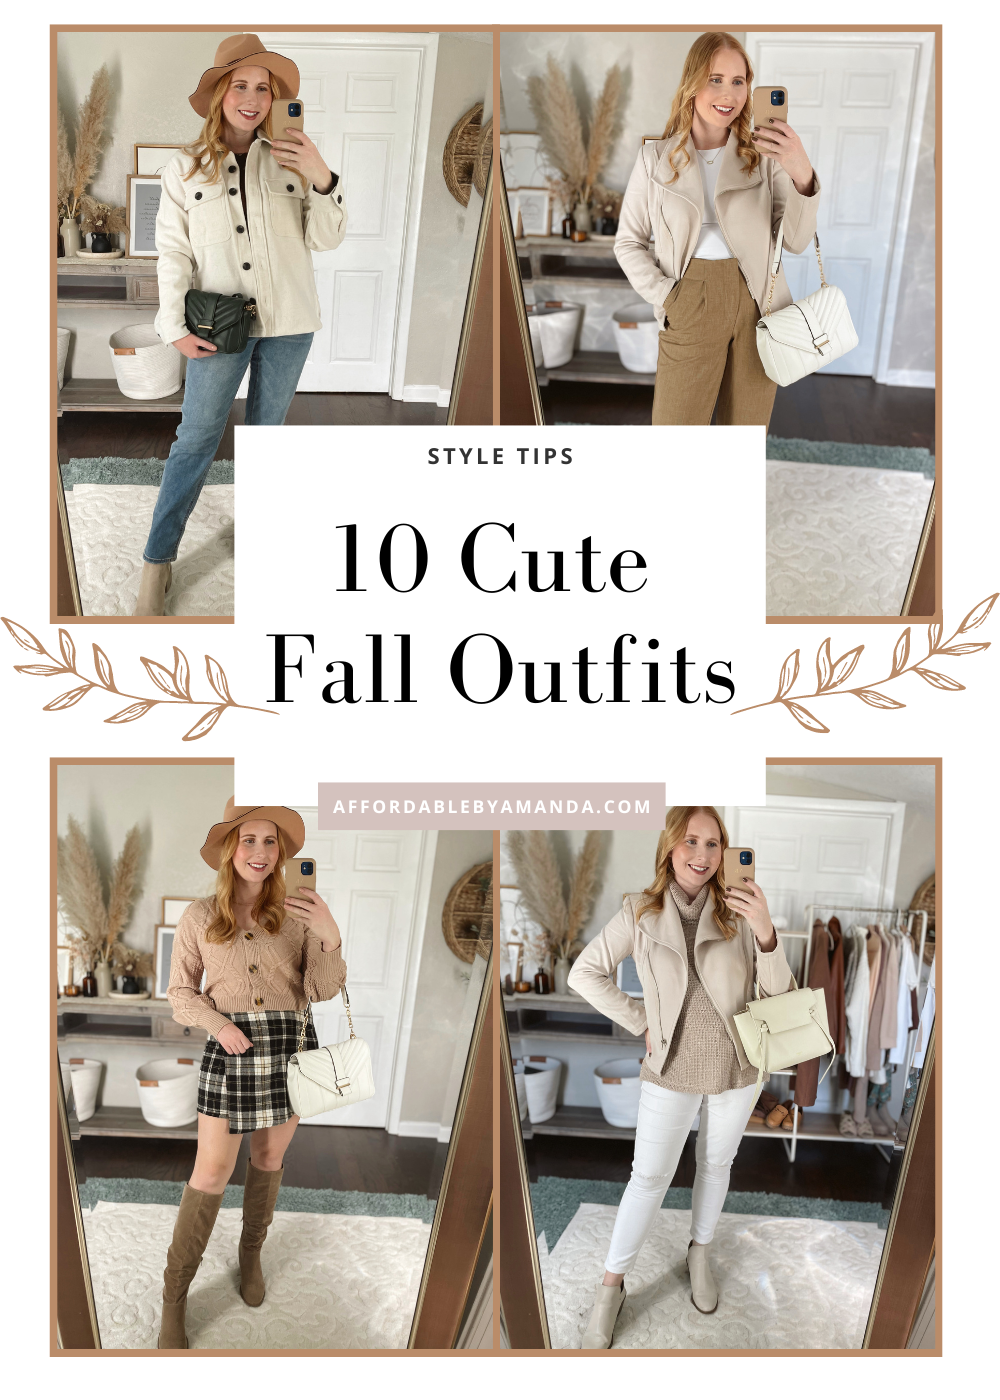 How To Wear Uggs: Complete Guide For Women 2019  Cute fall outfits, Fall  outfits women, Warm outfits